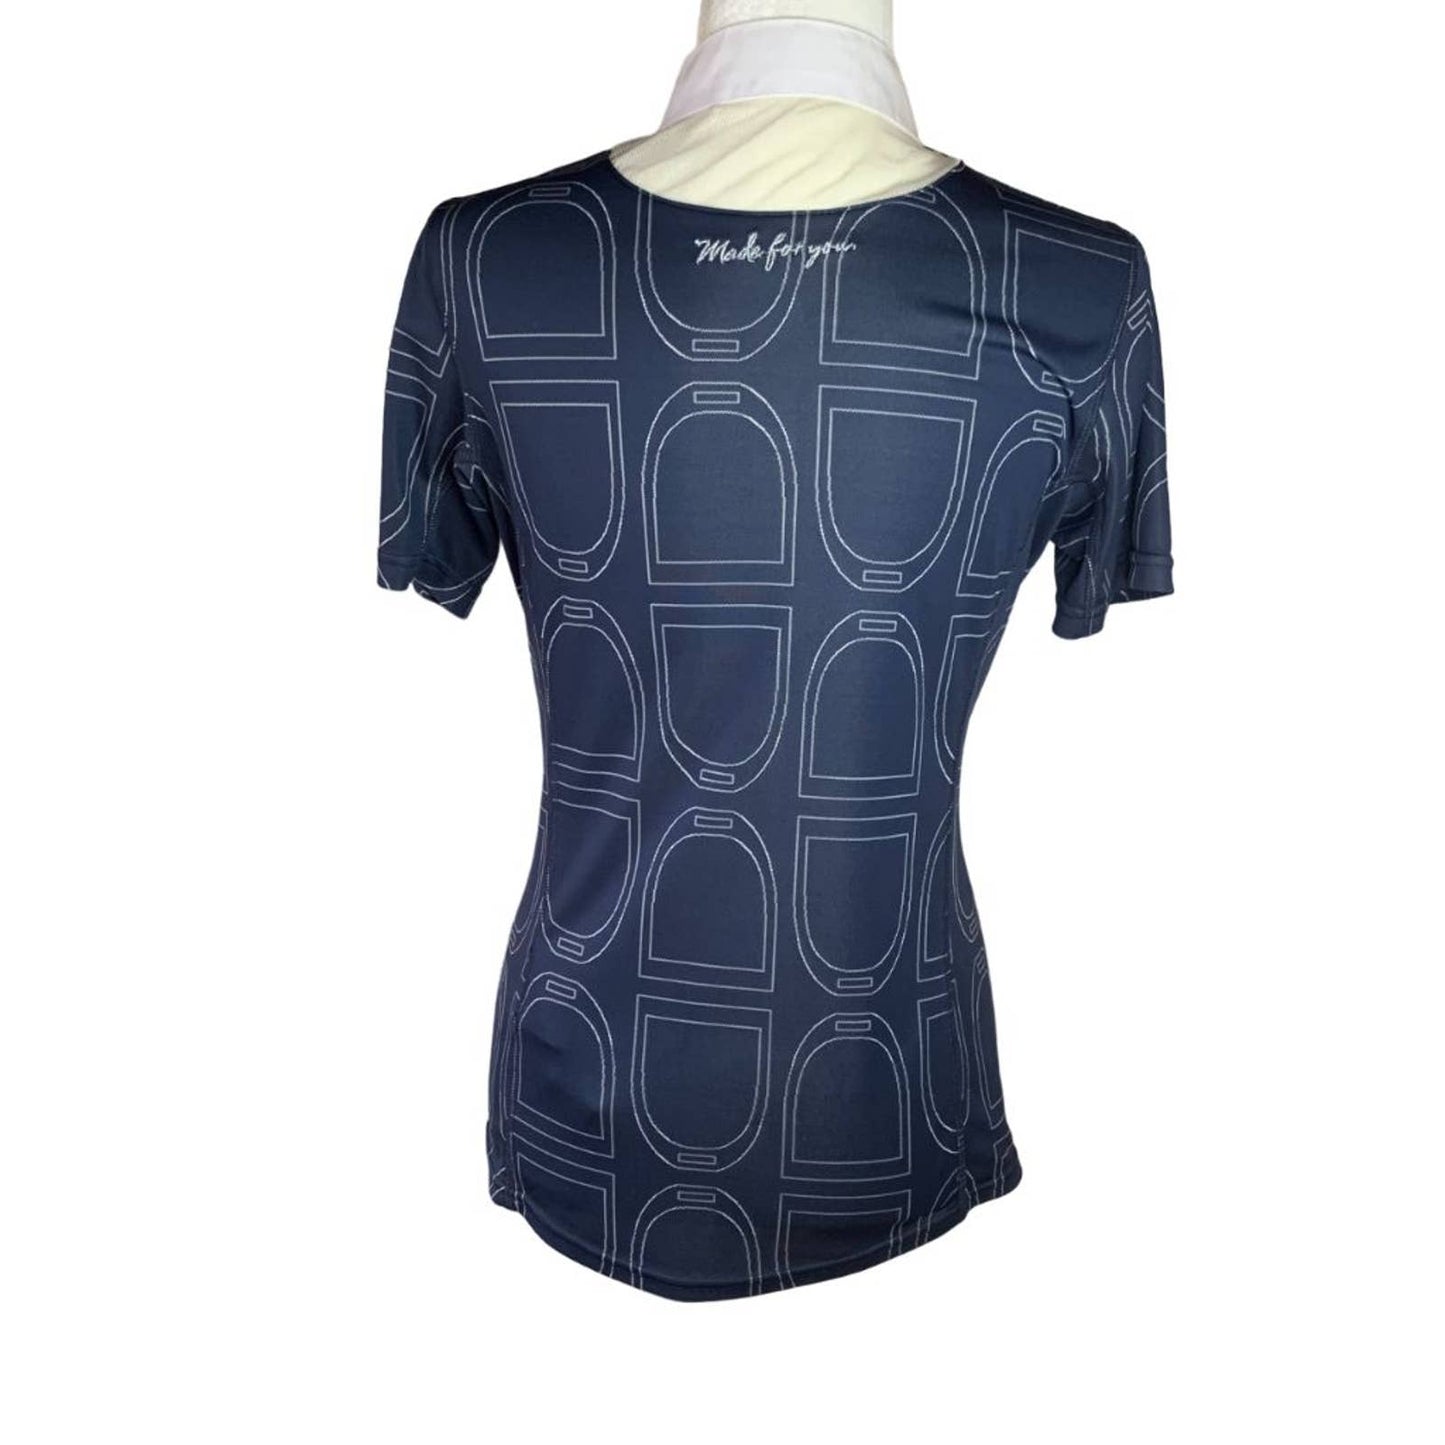 Cavallo Show Shirt in Navy - Woman's 10